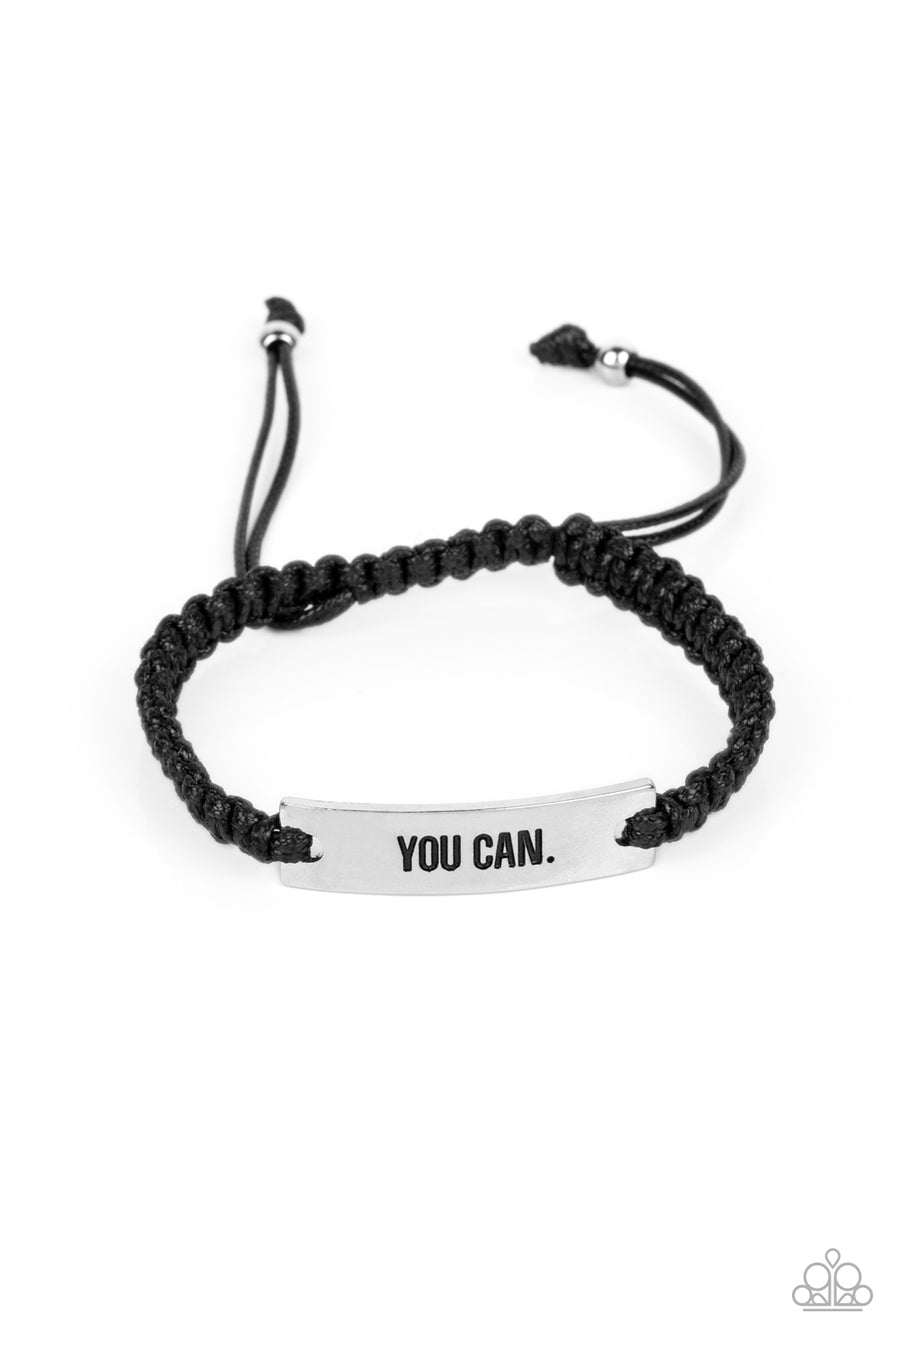 Beyond Belief - Black and Silver Urban Bracelet - Paprazzi Accessories - Thick black cording is woven together, wrapping around the wrist and connecting to a rectangular plate of silver. The phrase "You Can." is stamped into the center of the silver plate, adding a bold message of encouragement to the casual design.